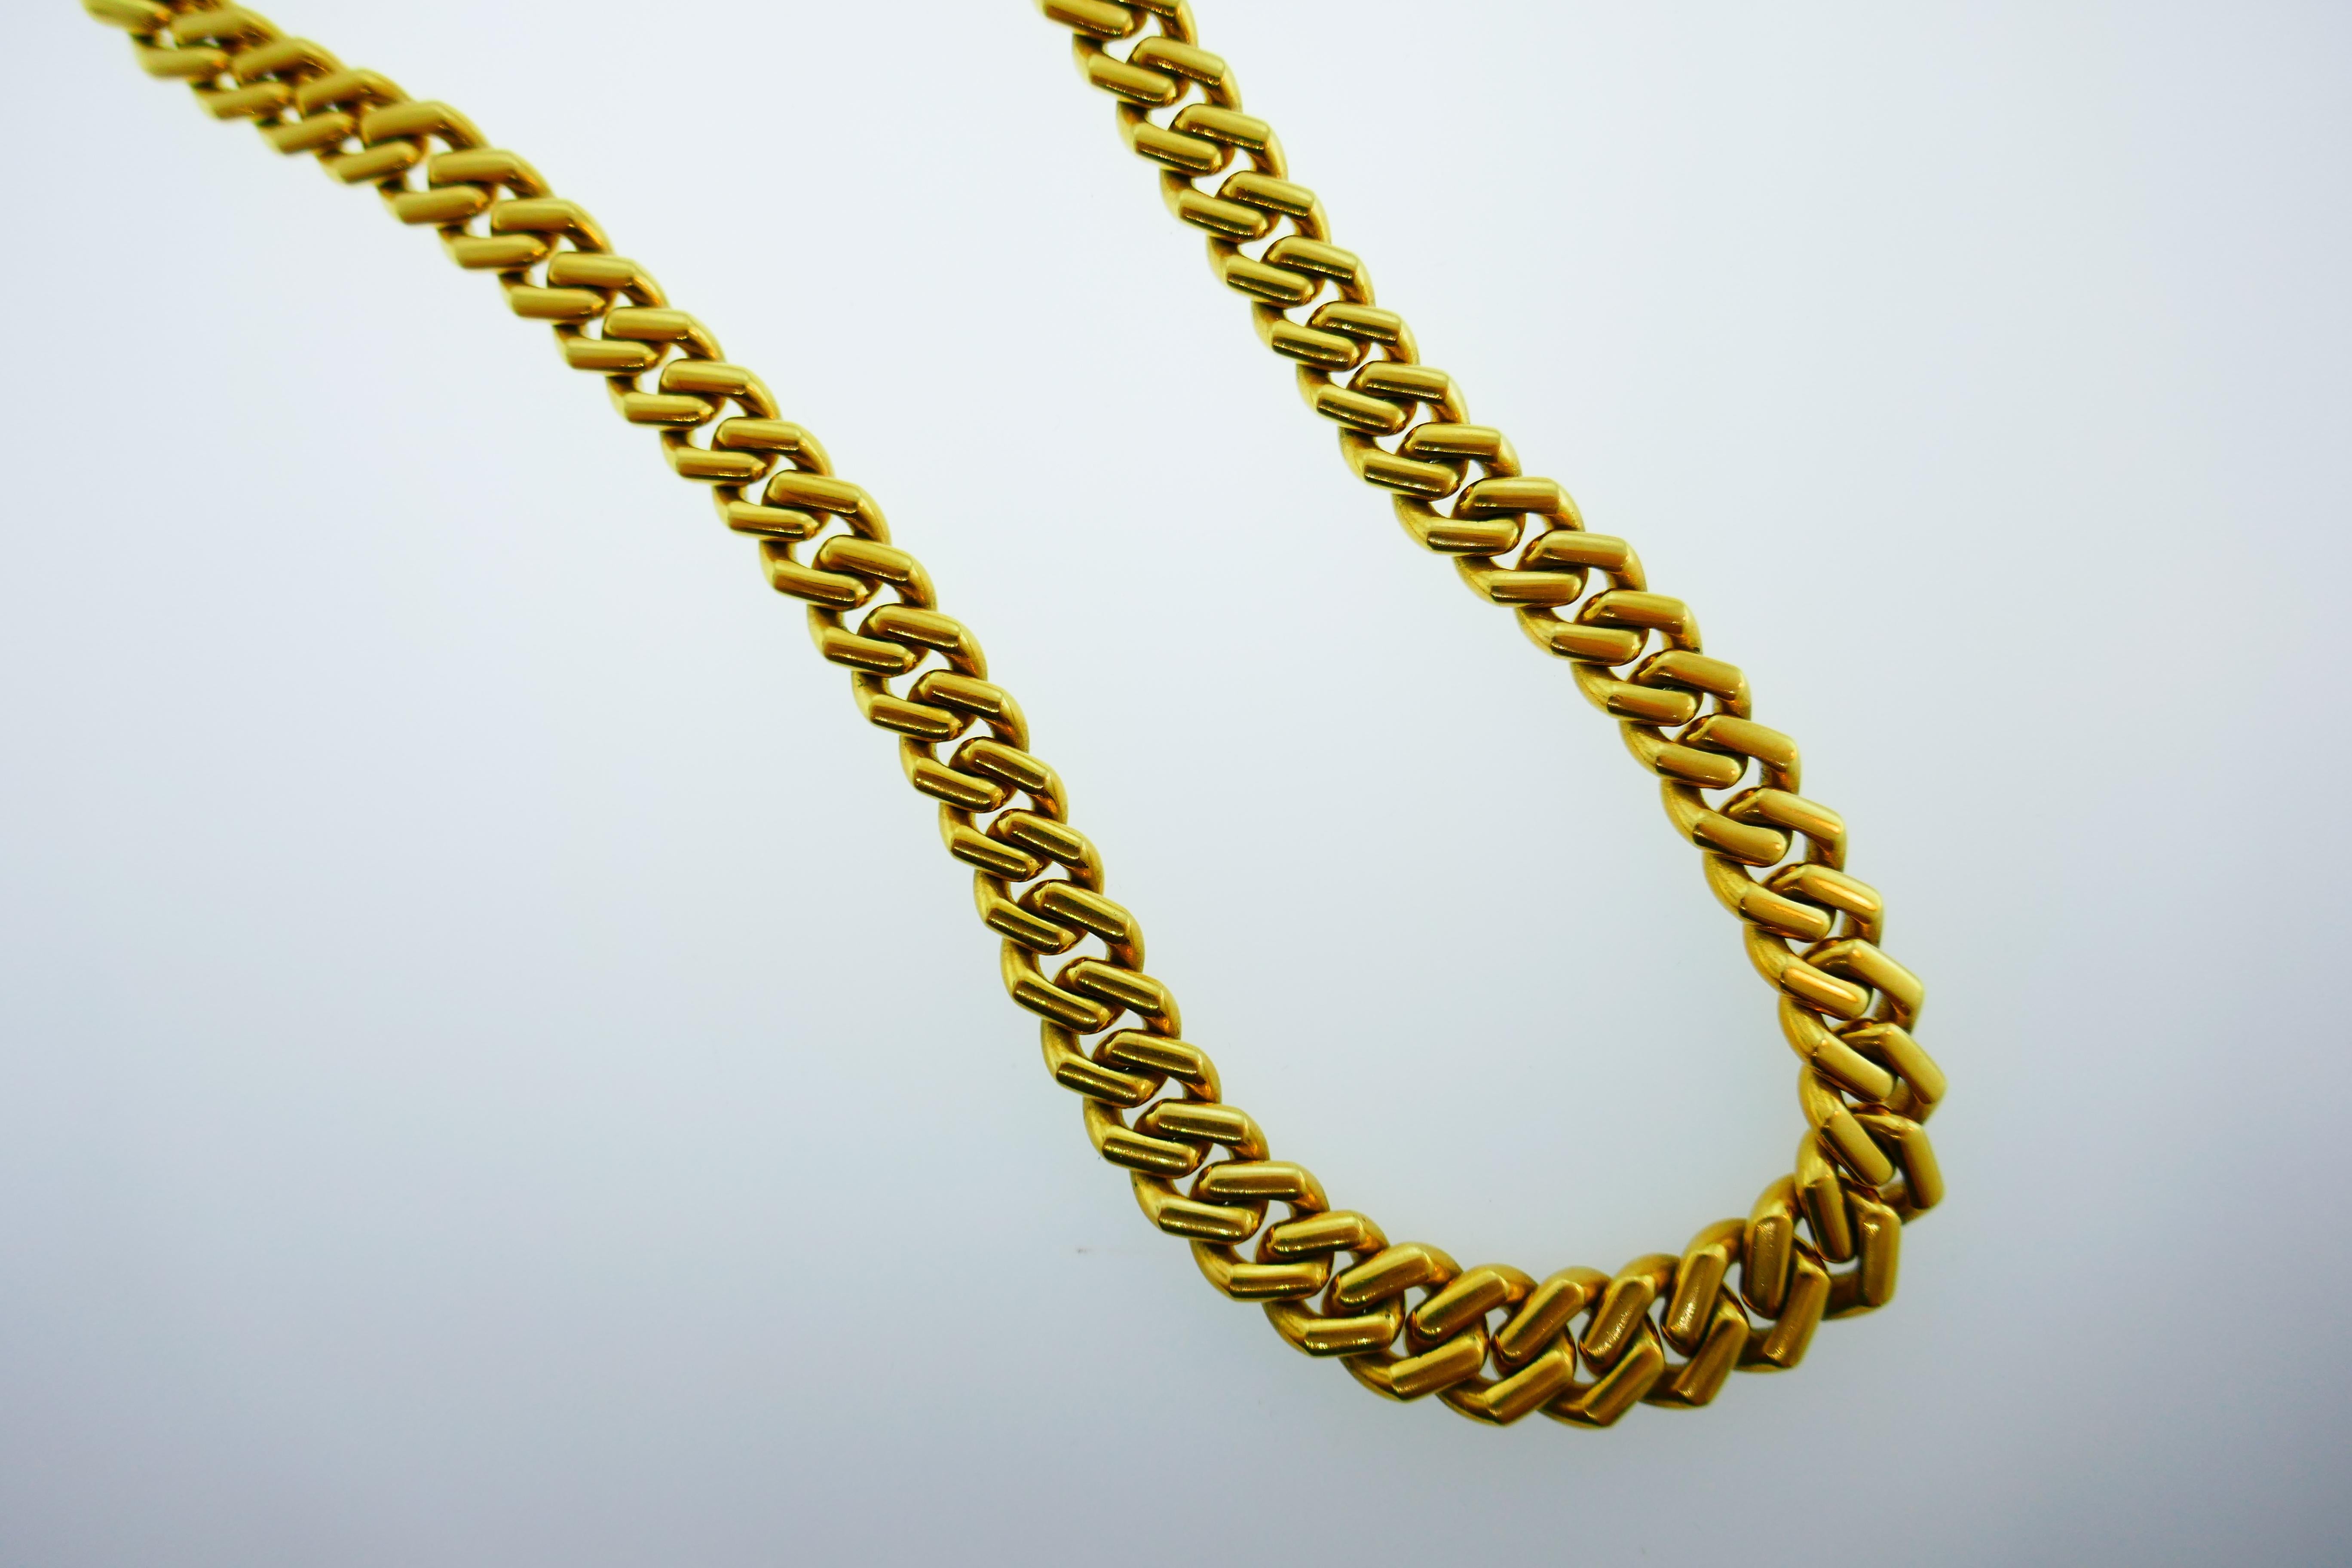 Bvlgari Italy 18k Yellow Gold Curb Link Chain Necklace Vintage circa 1970s Heavy 1